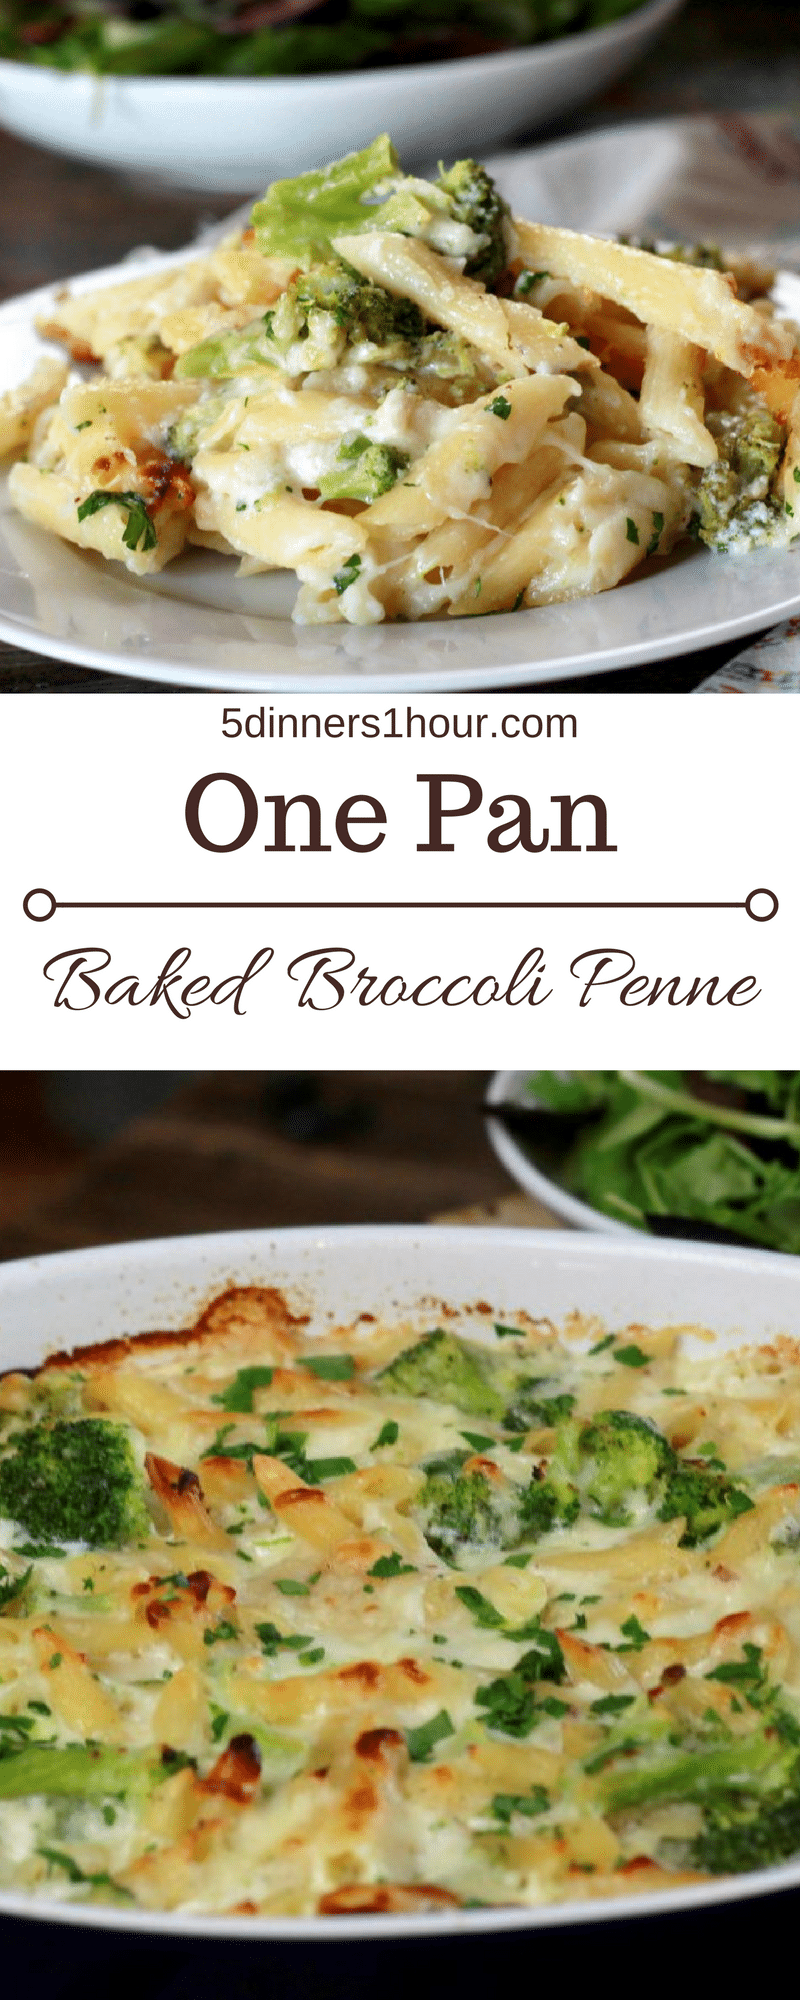 Baked Broccoli Penne - 5 Dinners In 1 Hour